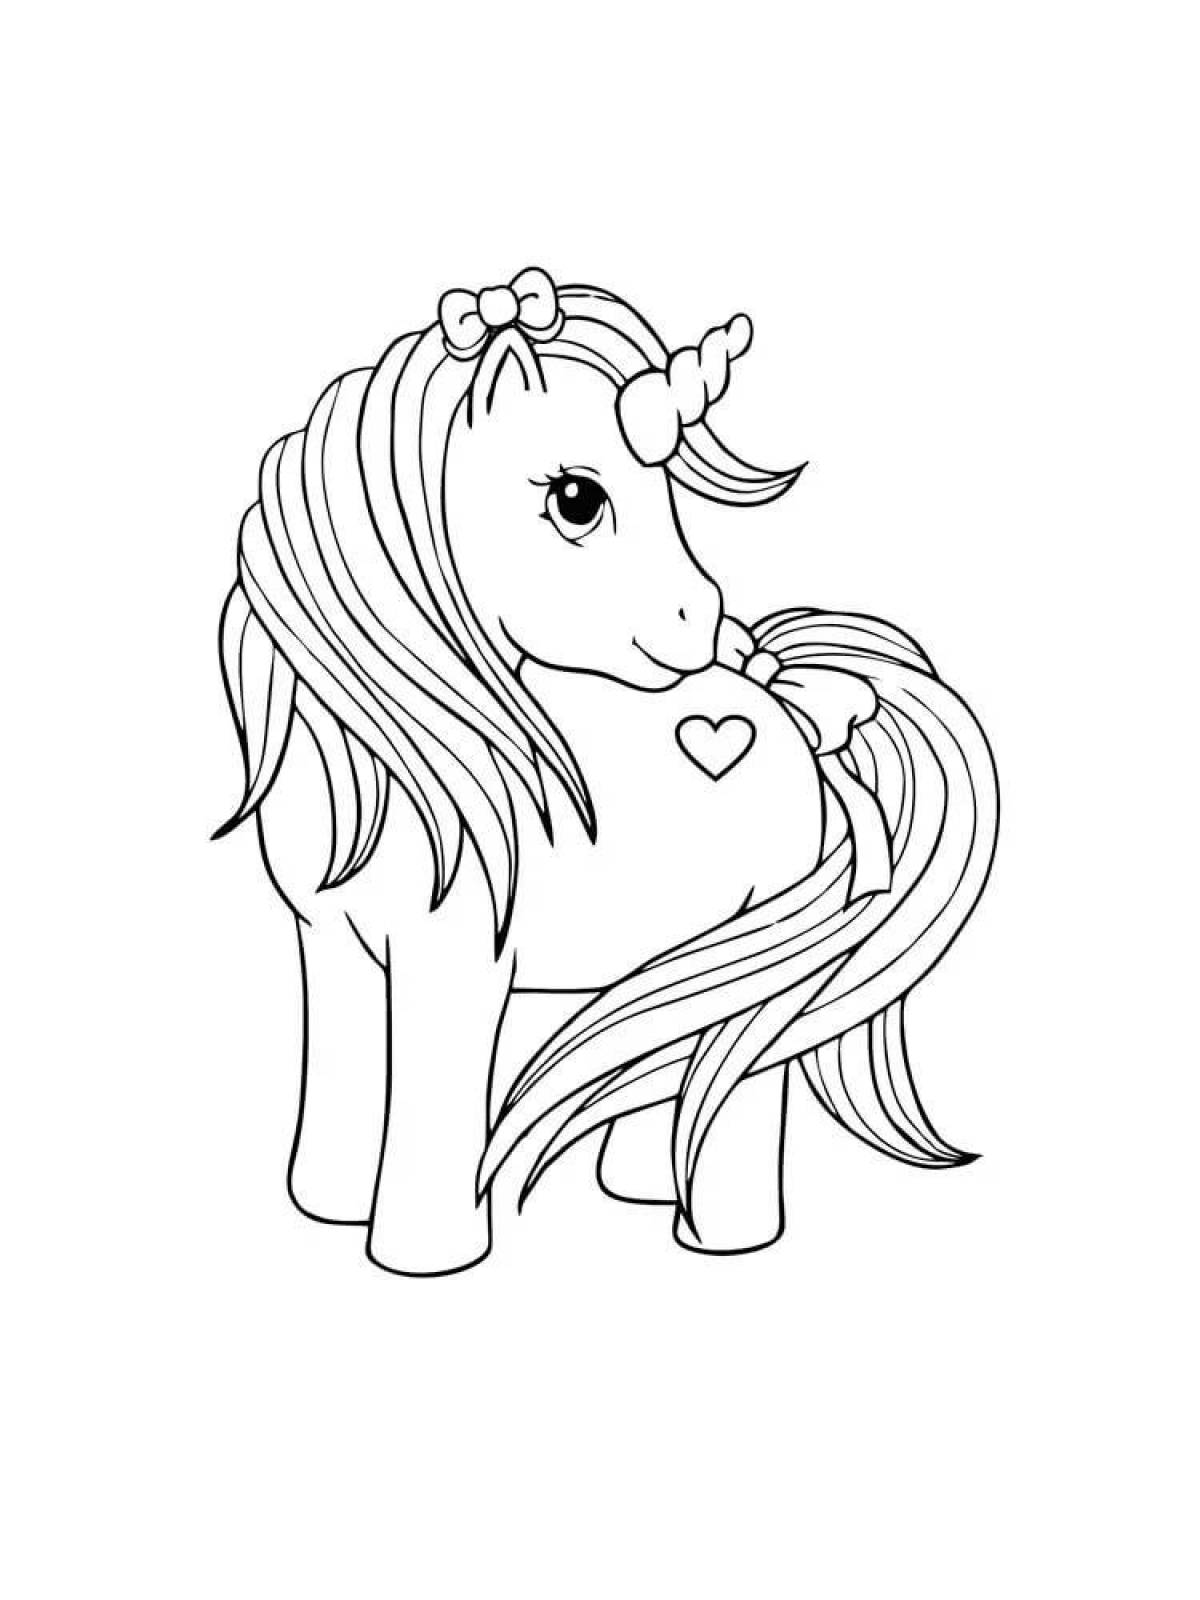 Glowing unicorn coloring pages for girls